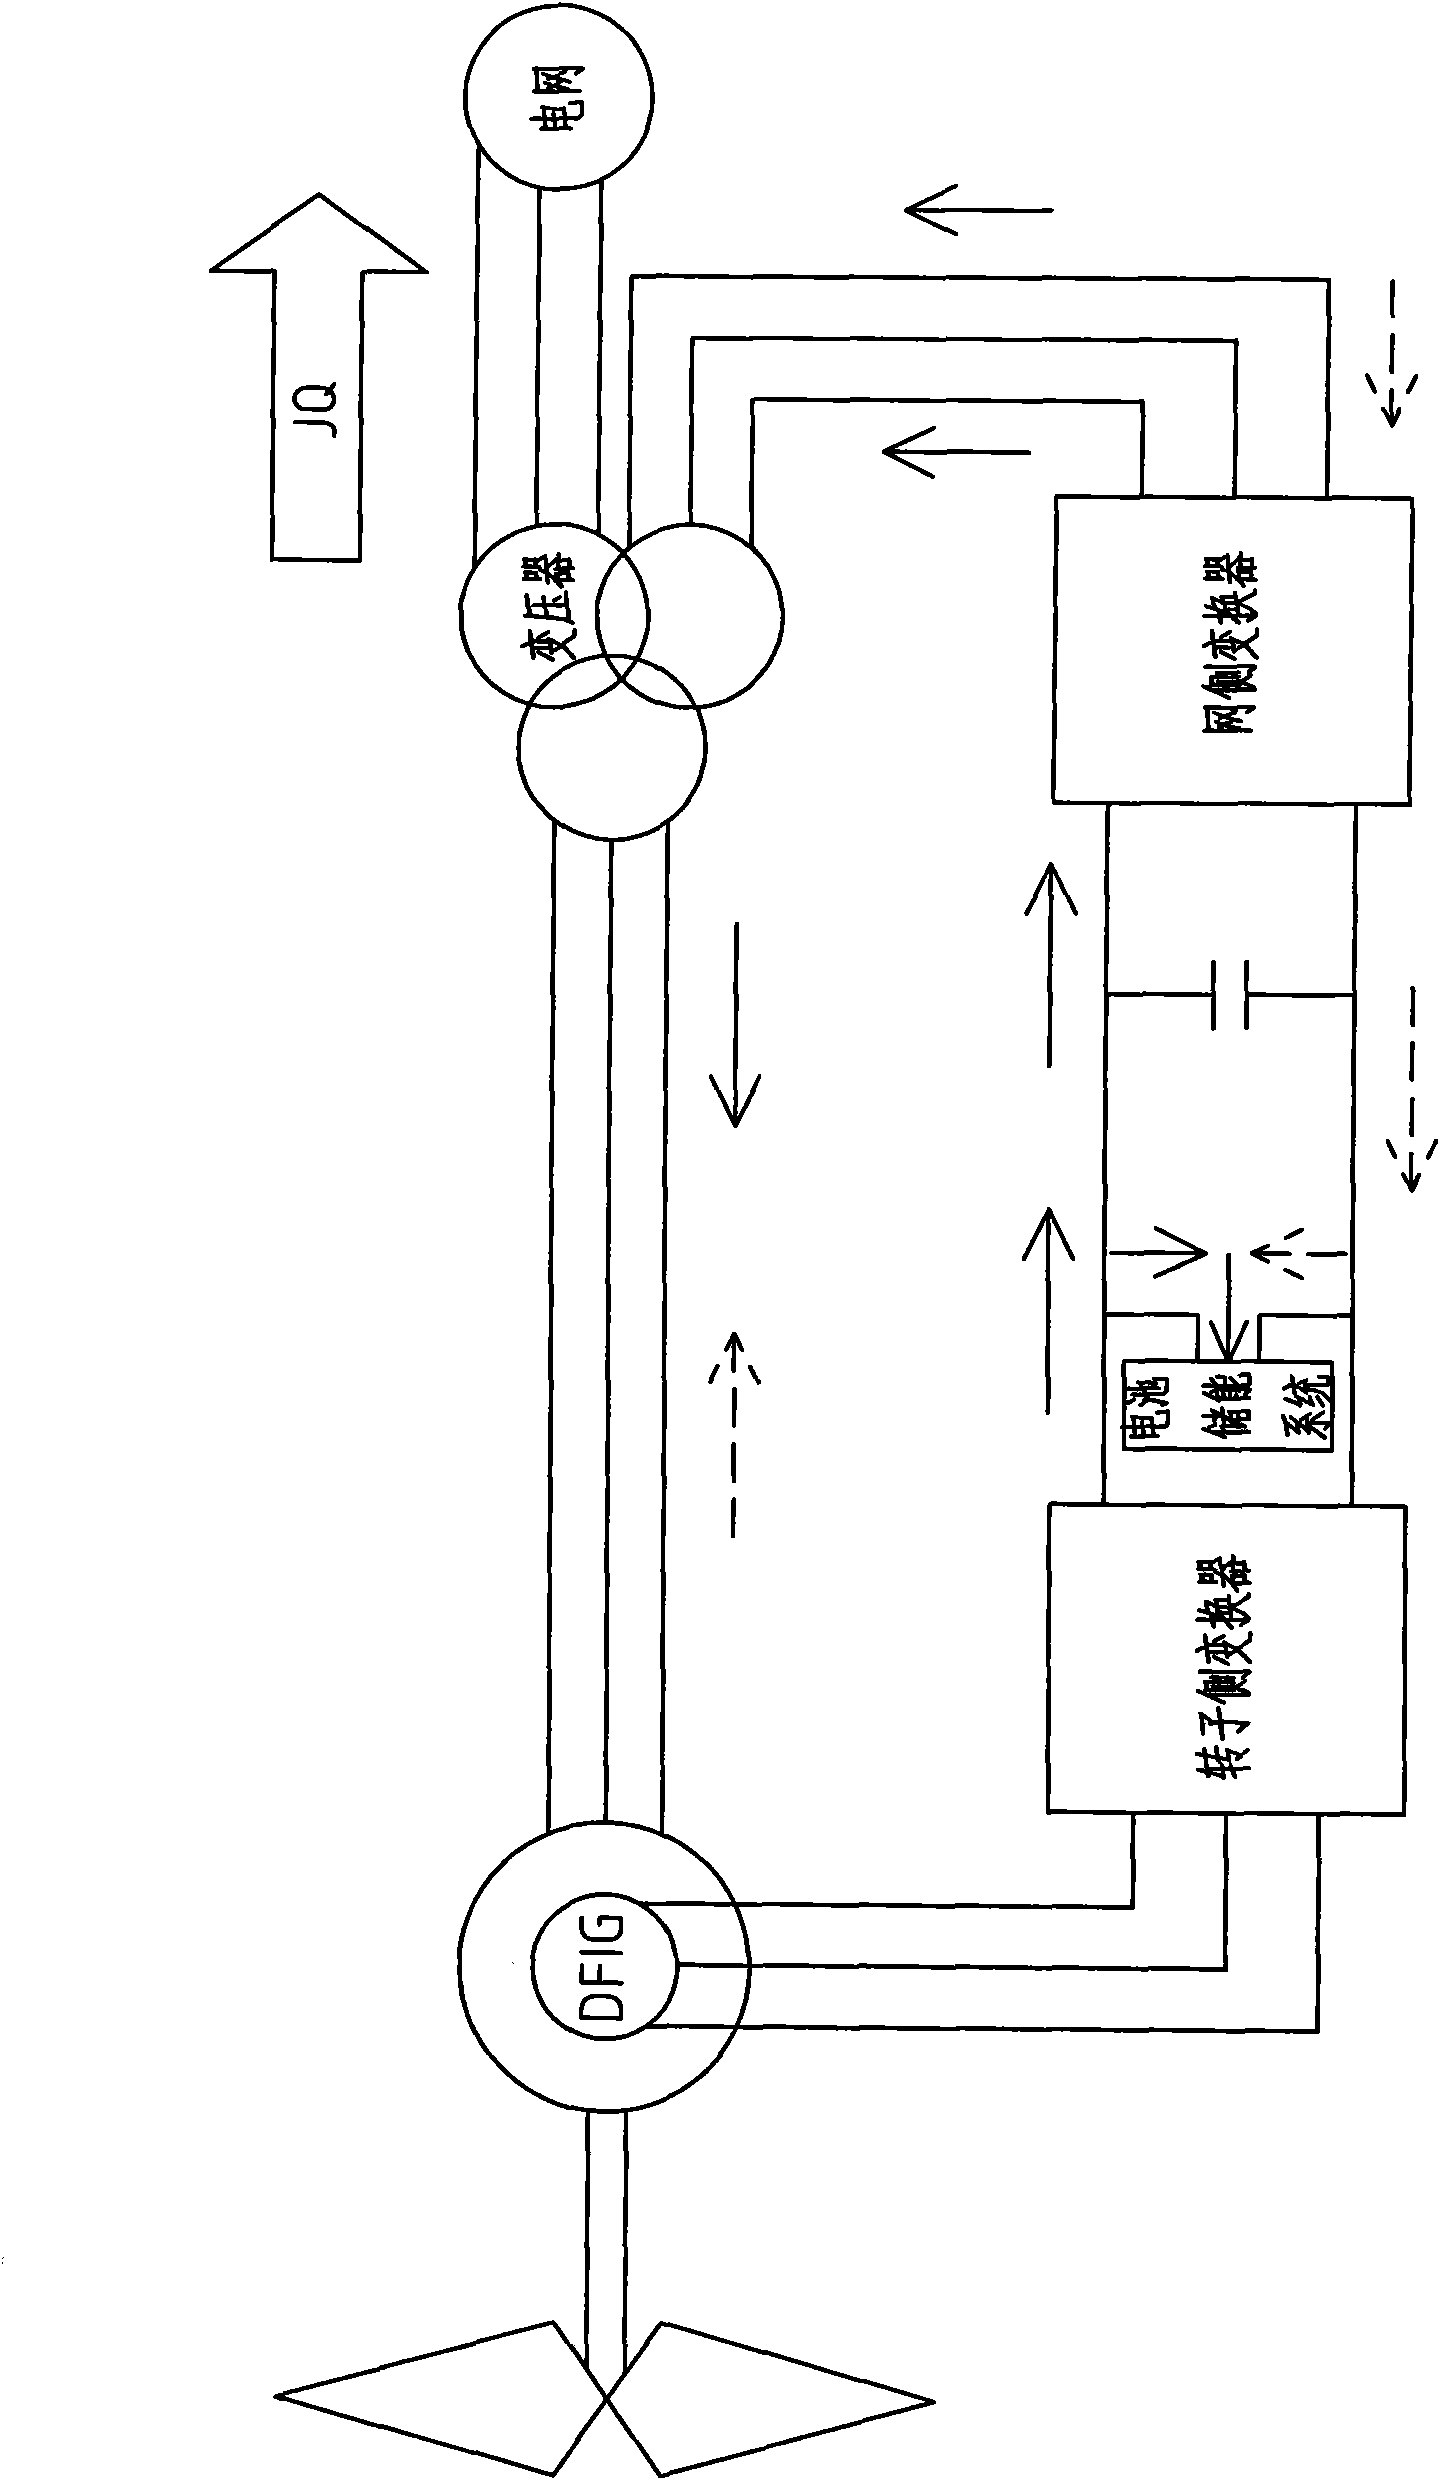 Energy storage method for double-feed current transformer